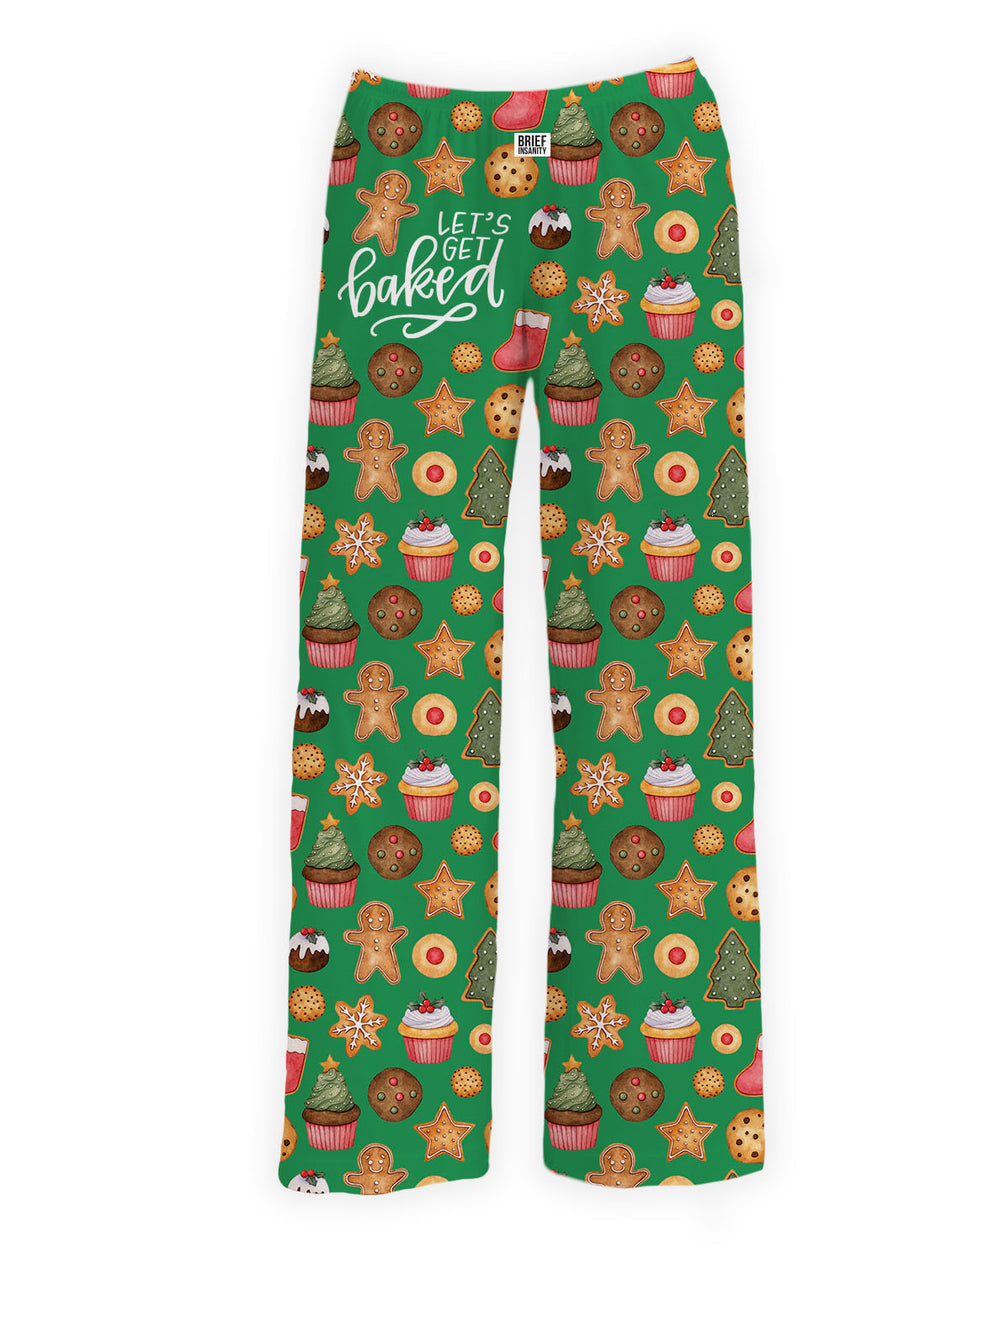 Dale's Exclusive Lets Get Baked Lounge Pants